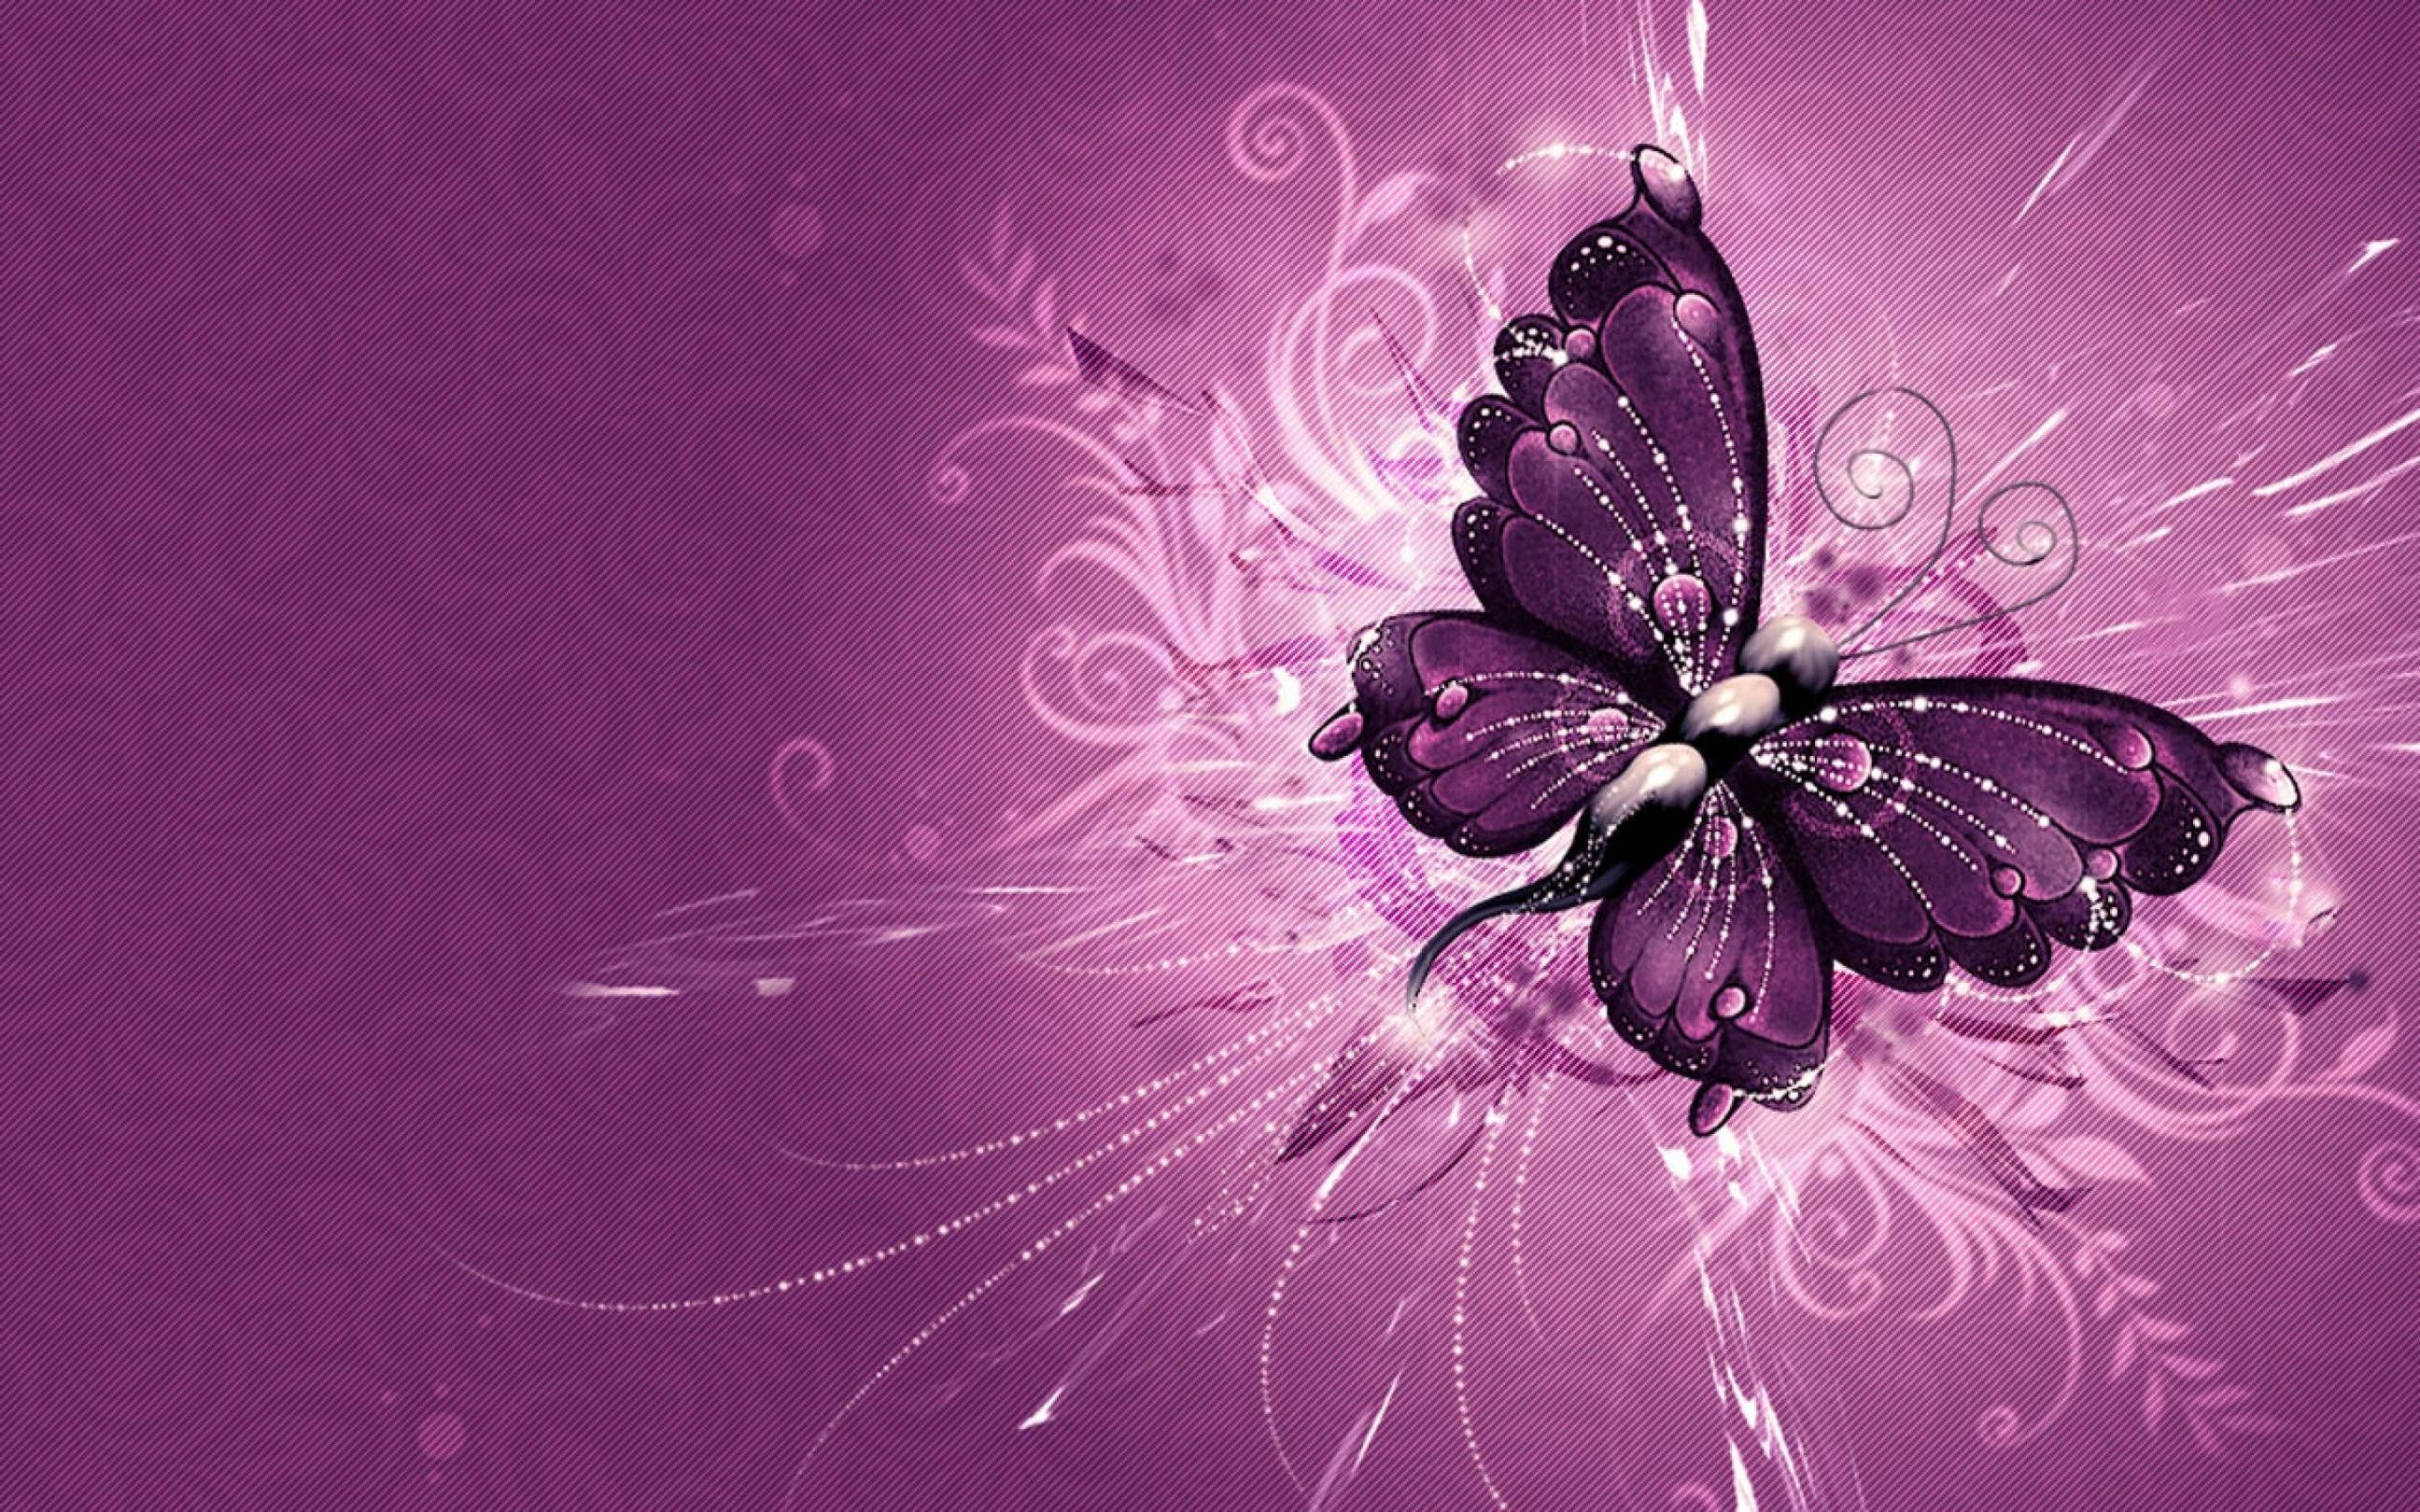 Purple Butterfly Background Images  Free Download on Freepik